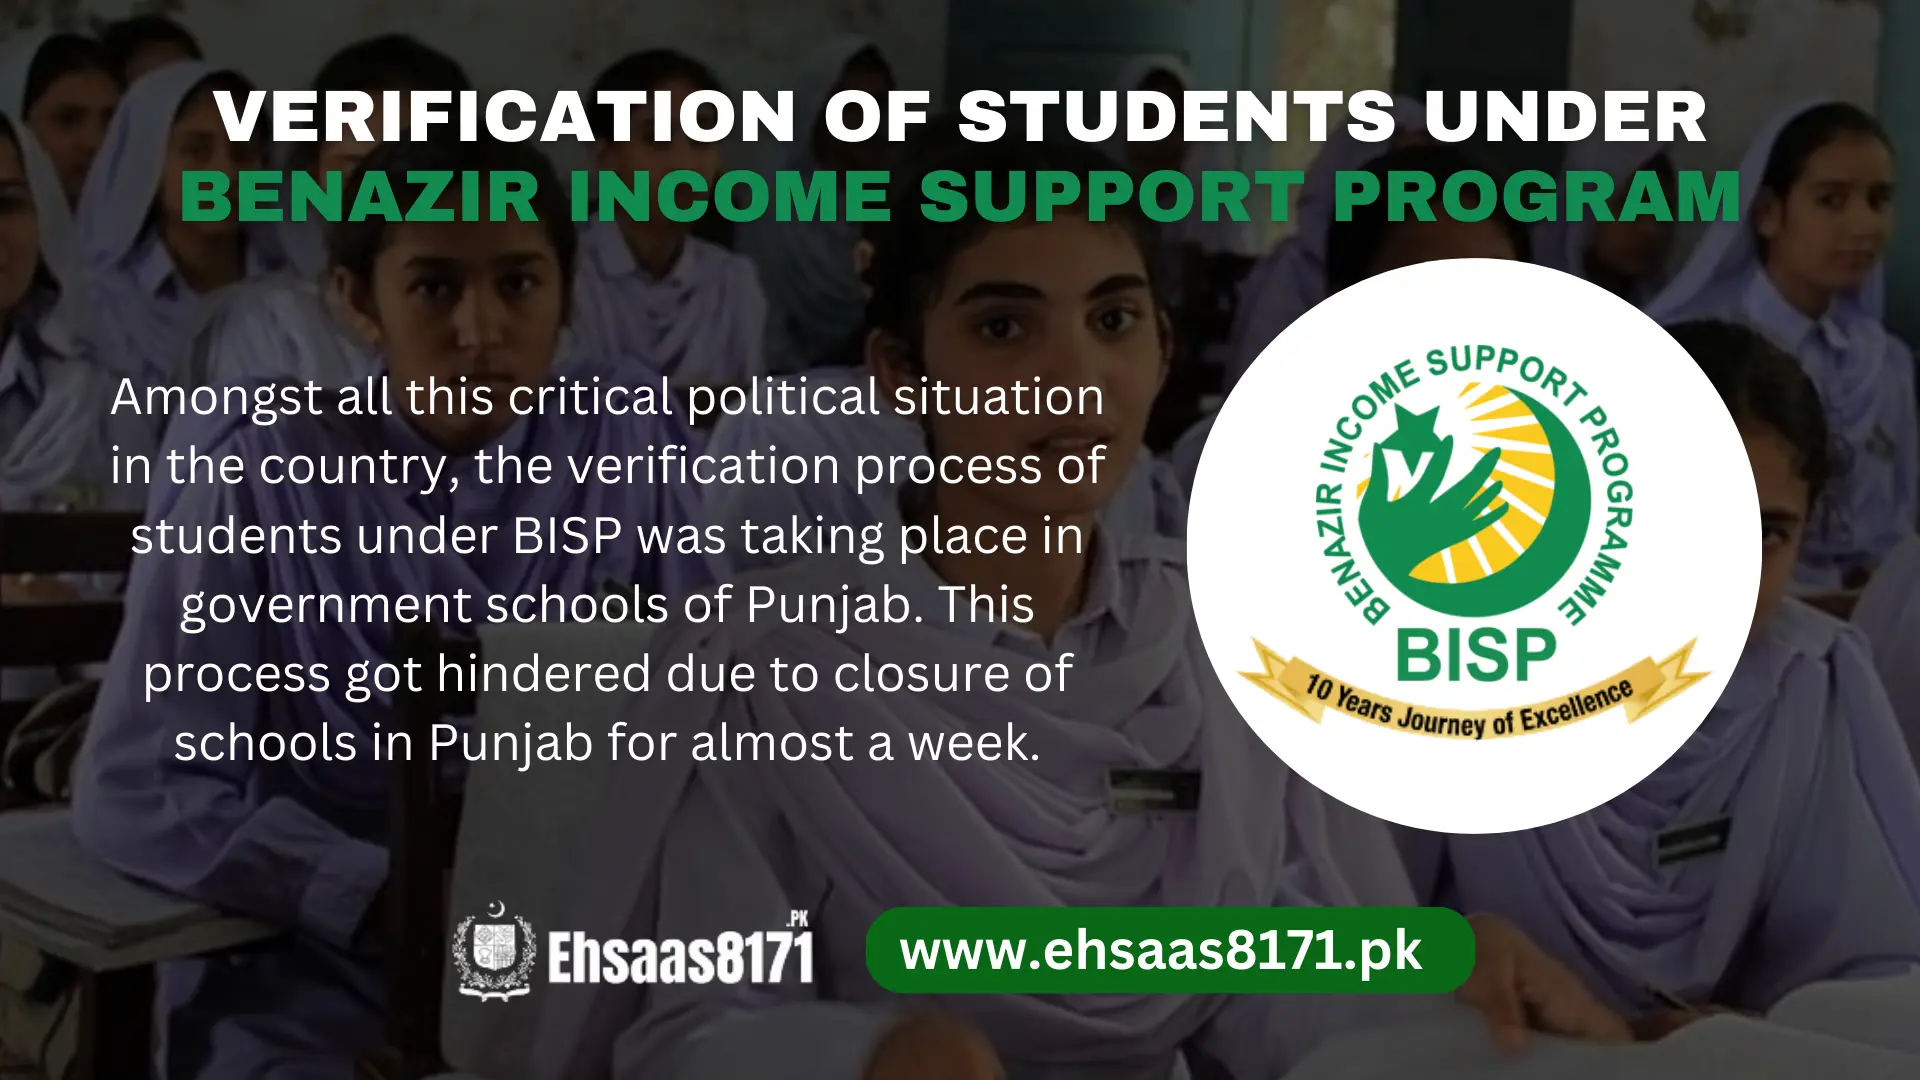 Verification of students under Benazir income support program